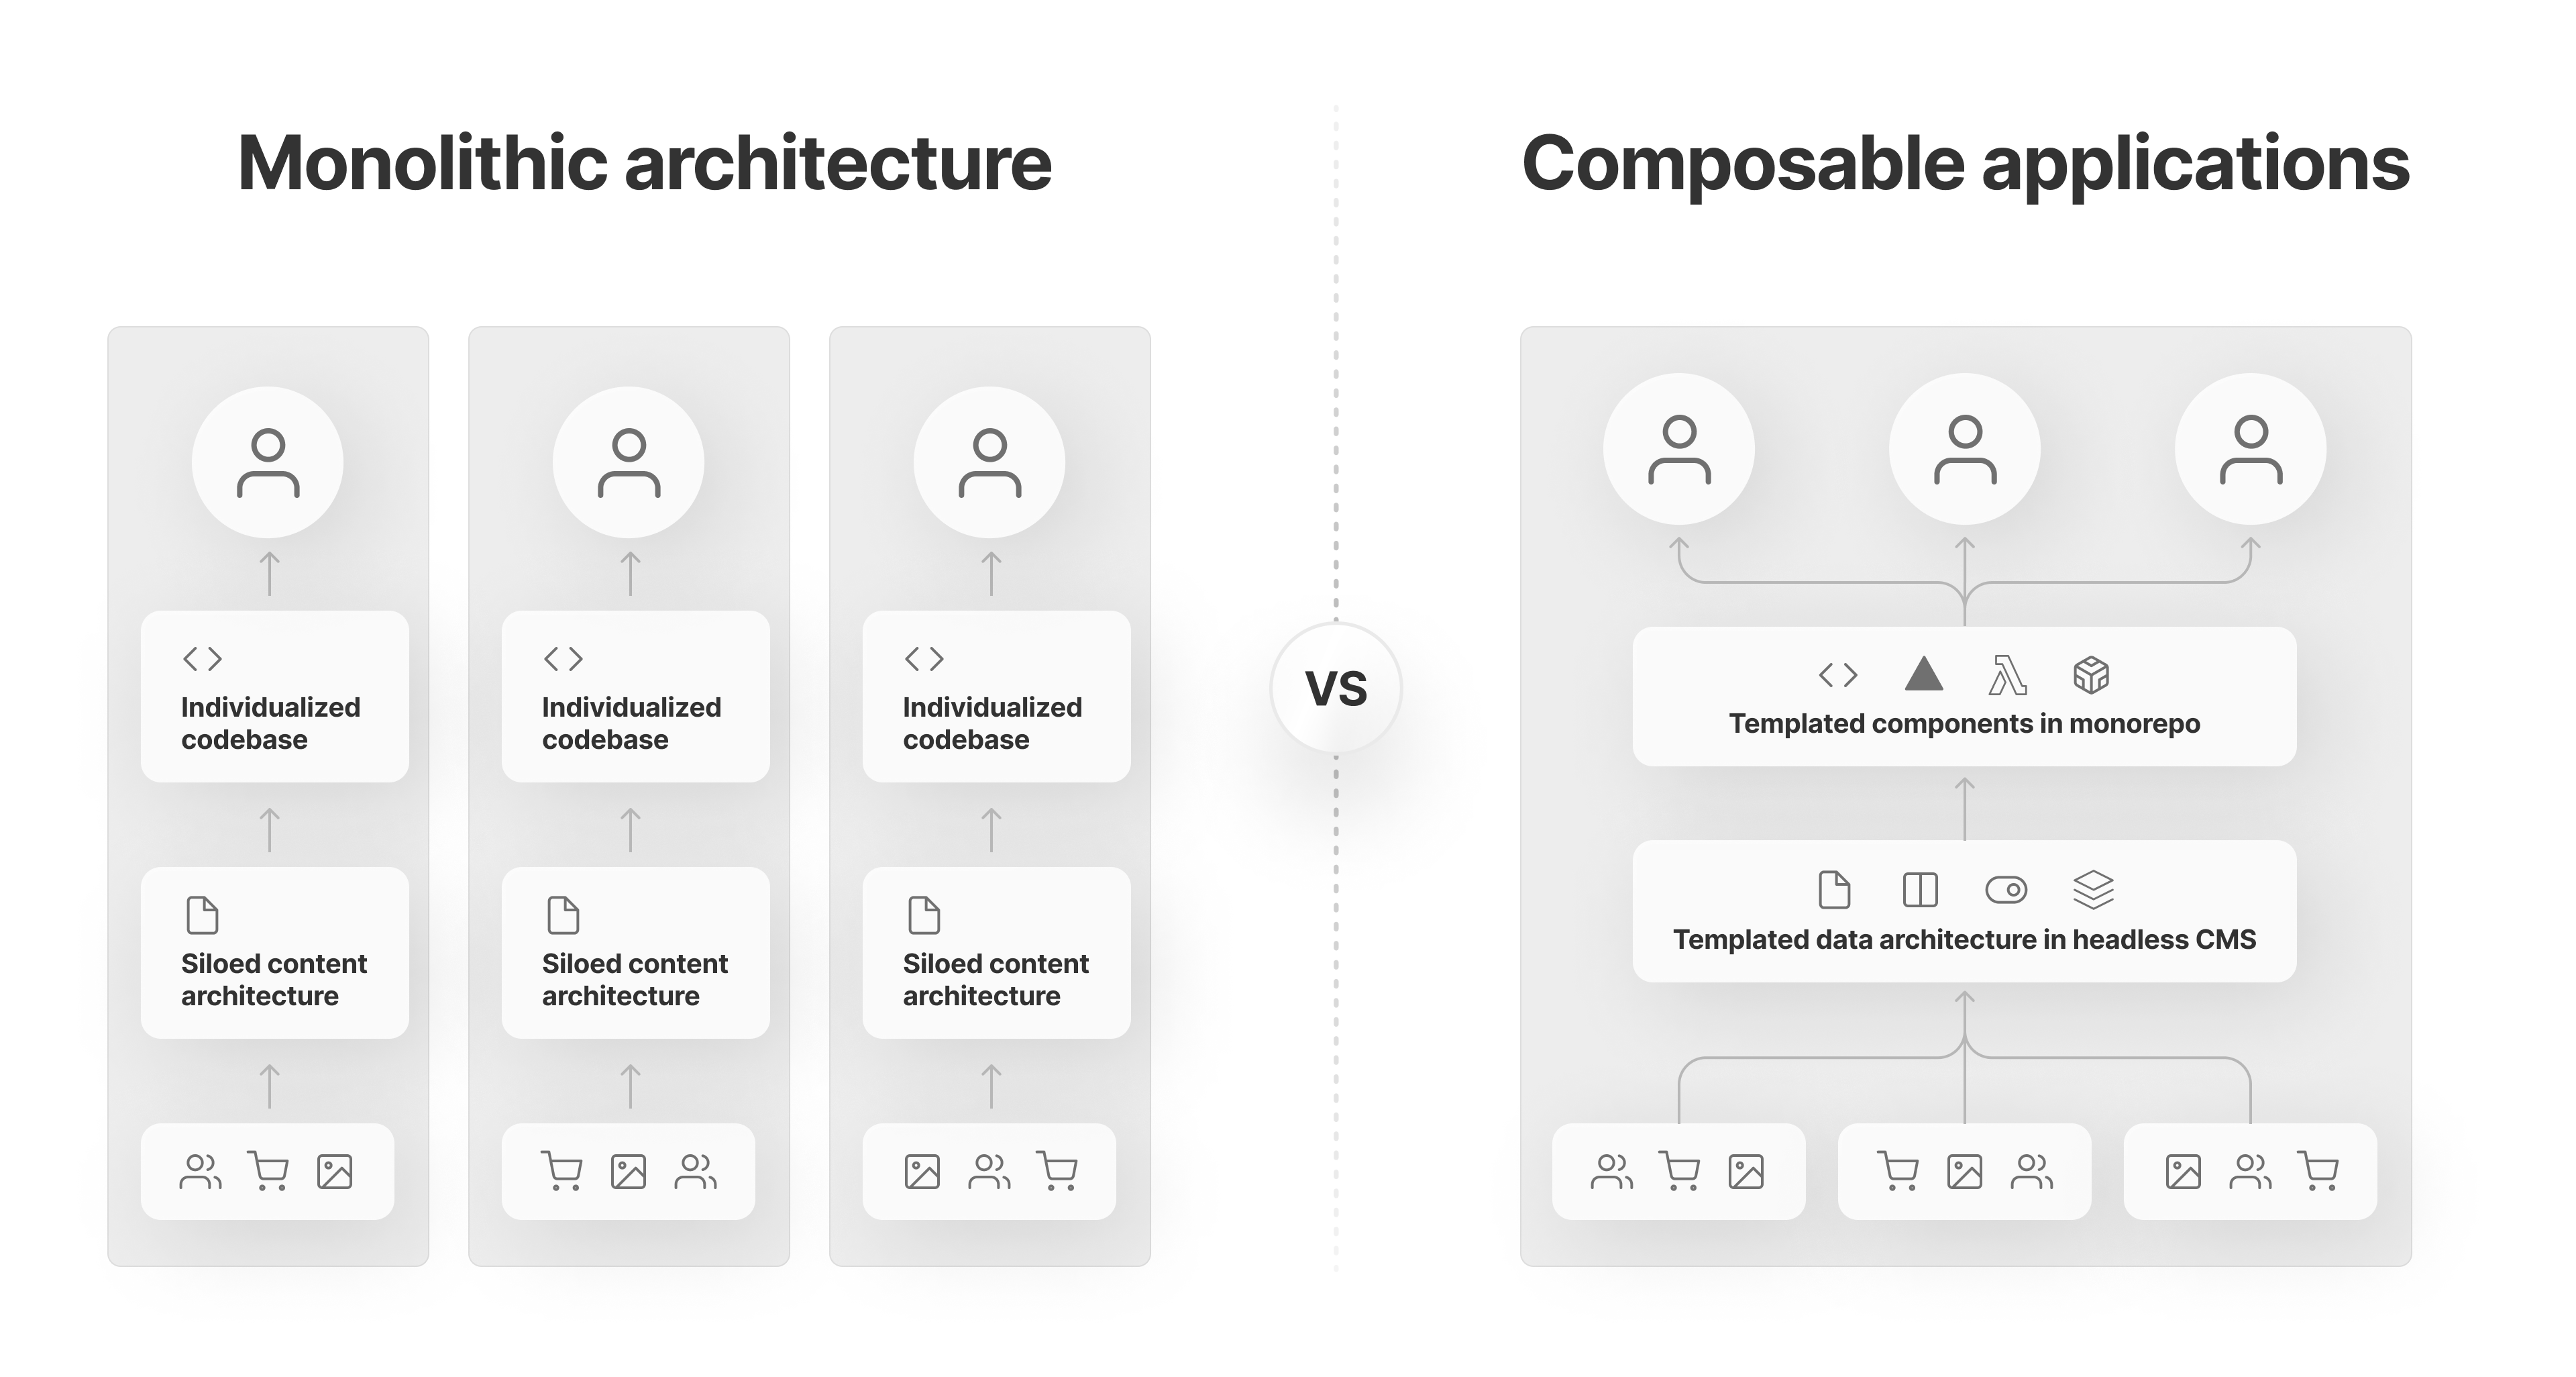 Monolithic architecture often requires repetition of labor, but the flexibility of composable allows for data templating that works for all clients.